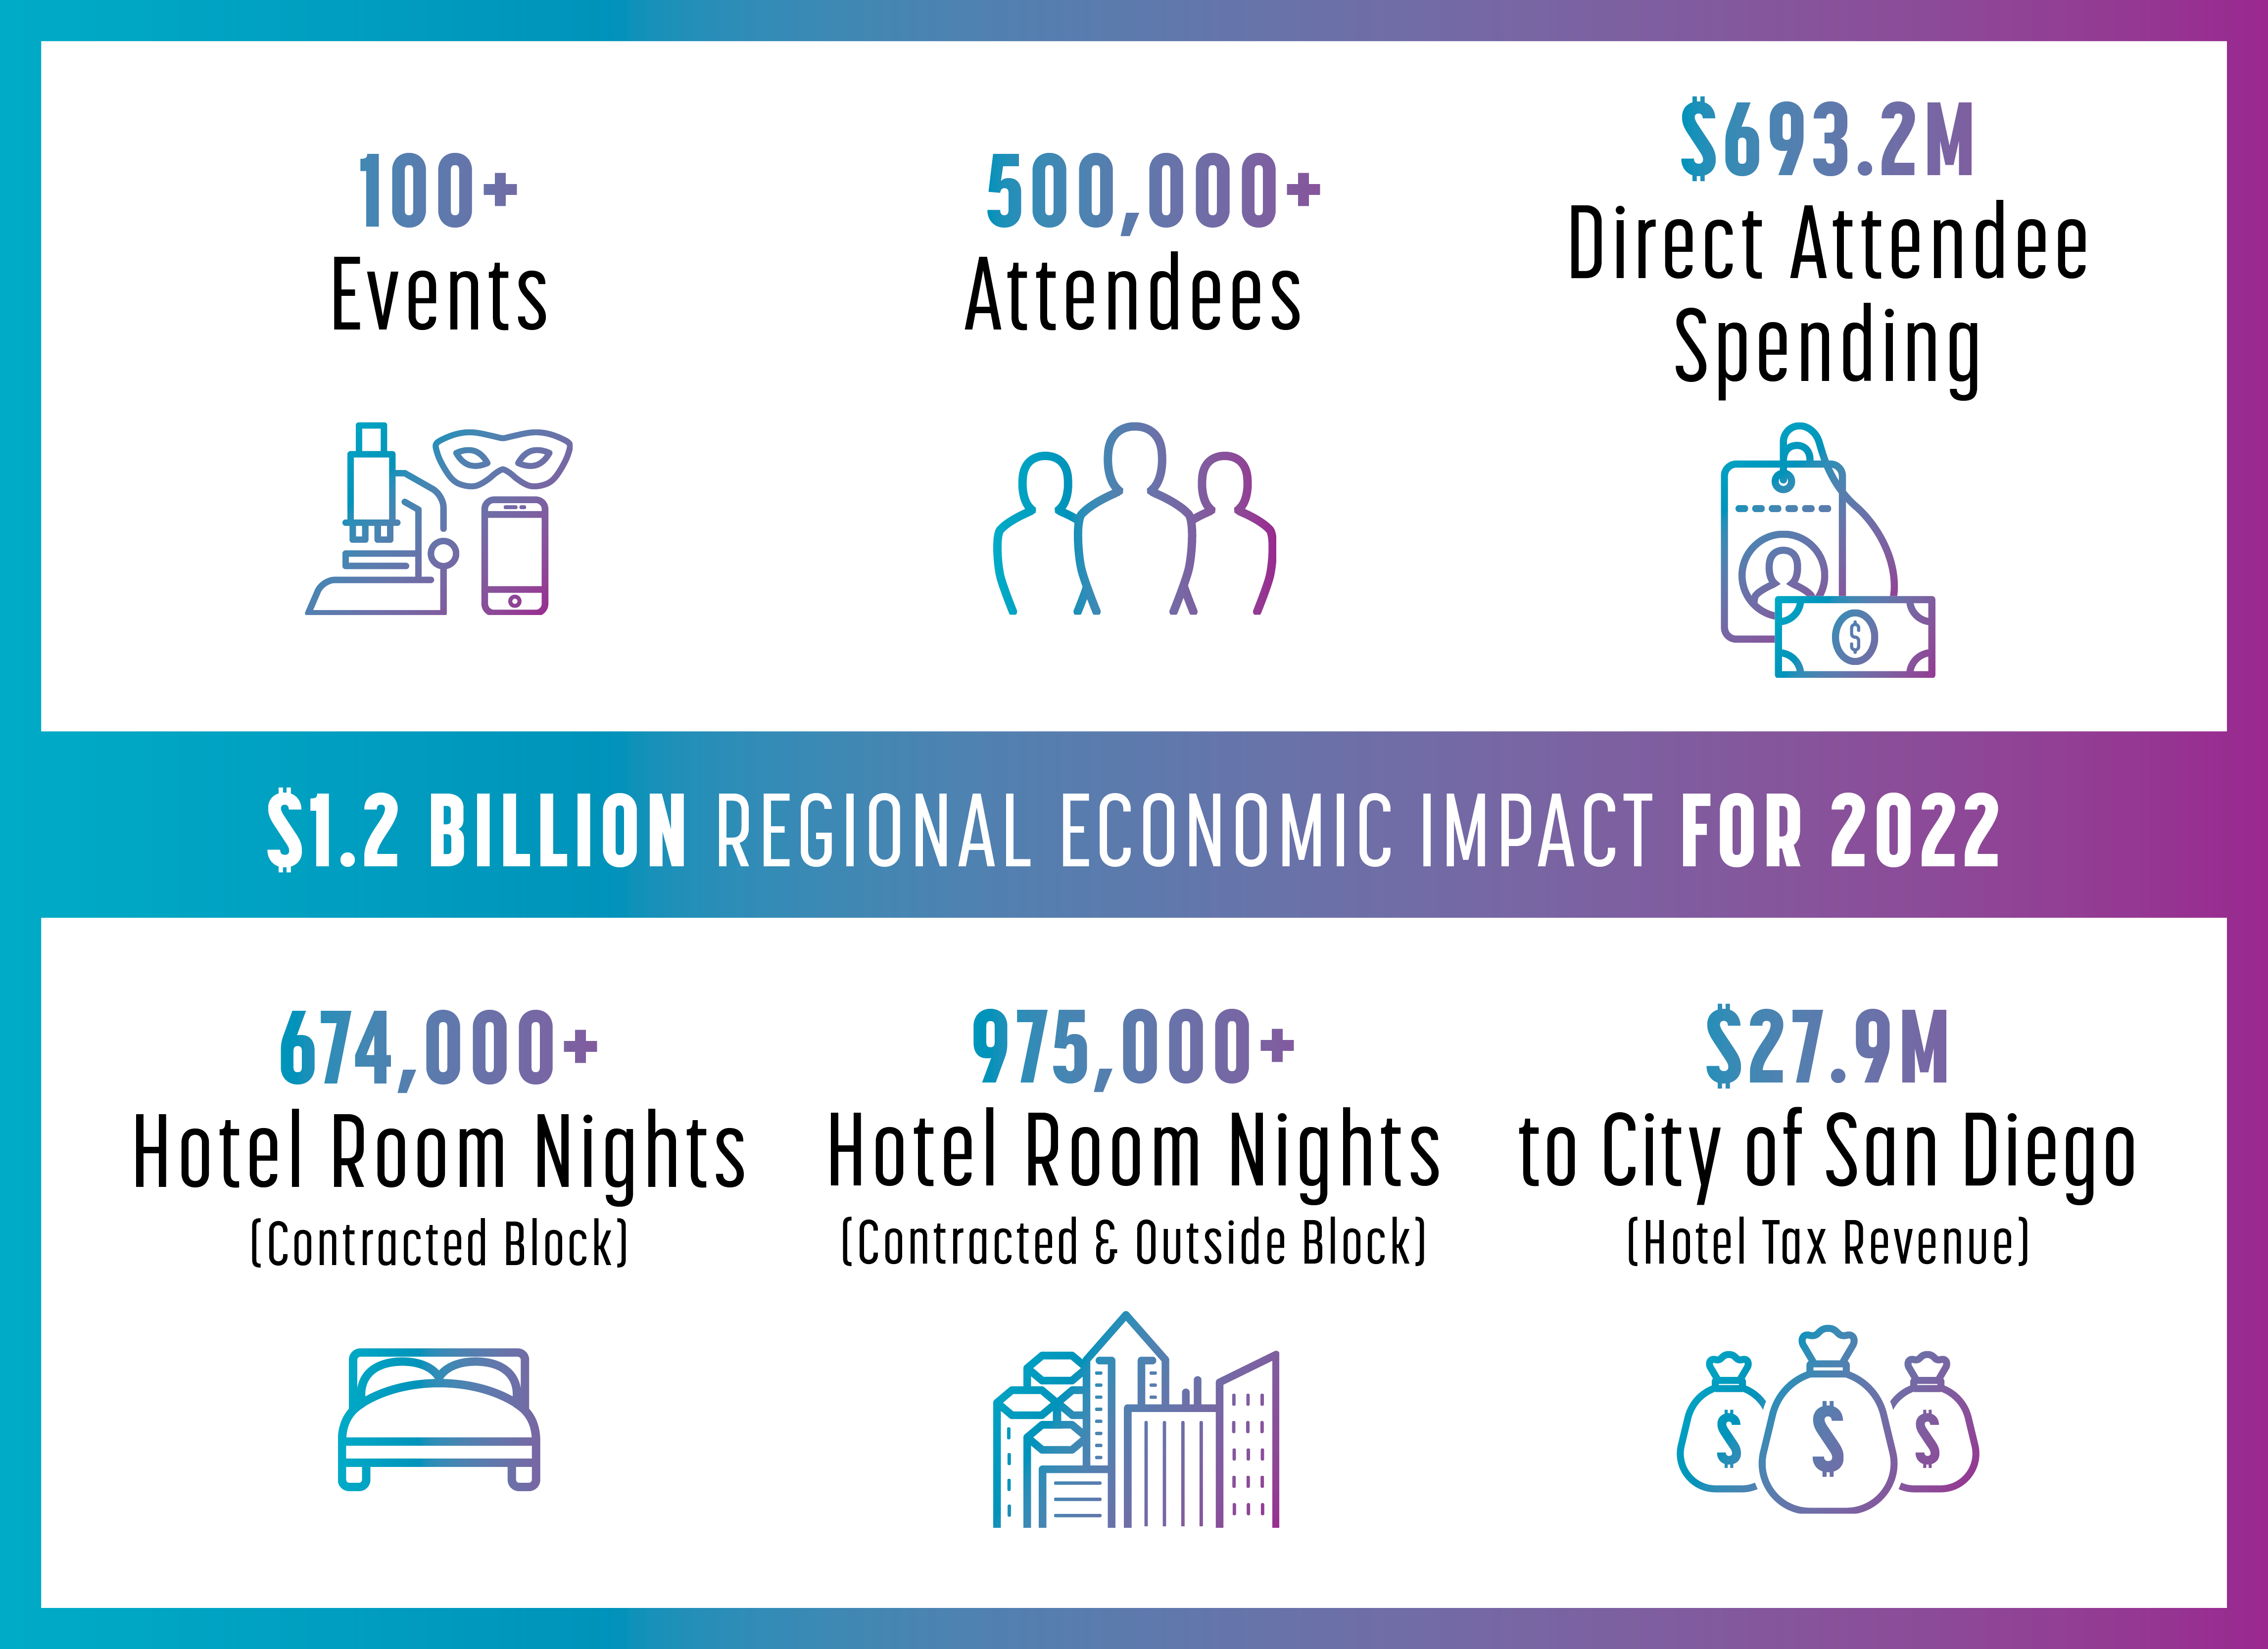 2022 saw 100+ events with over 500,000 attendees. The total of 1.2 billion dollars in regional economic impact came in through over 674,000 hotel room nights in contracted blocks, 975,000 hotel room nights in contracted and outside block. 27.9 million dollars went to the City of San Diego in hotel and sales tax revenues.